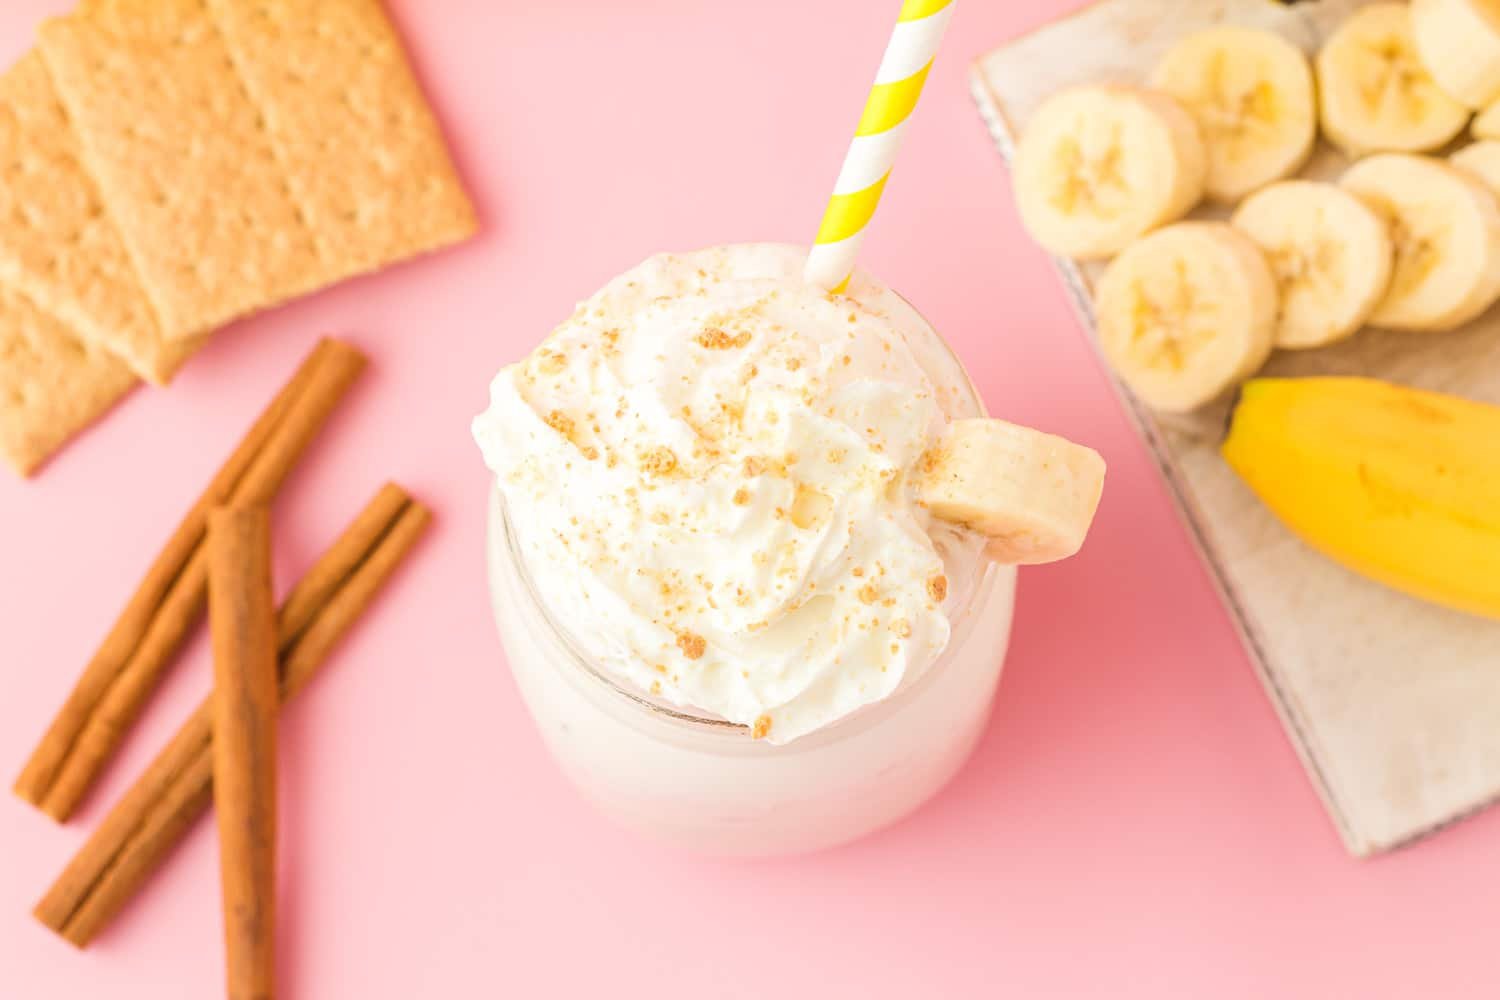 Overhead view of banana cream pie smoothie on pink background with sliced bananas, graham crackers, and cinnamon sticks